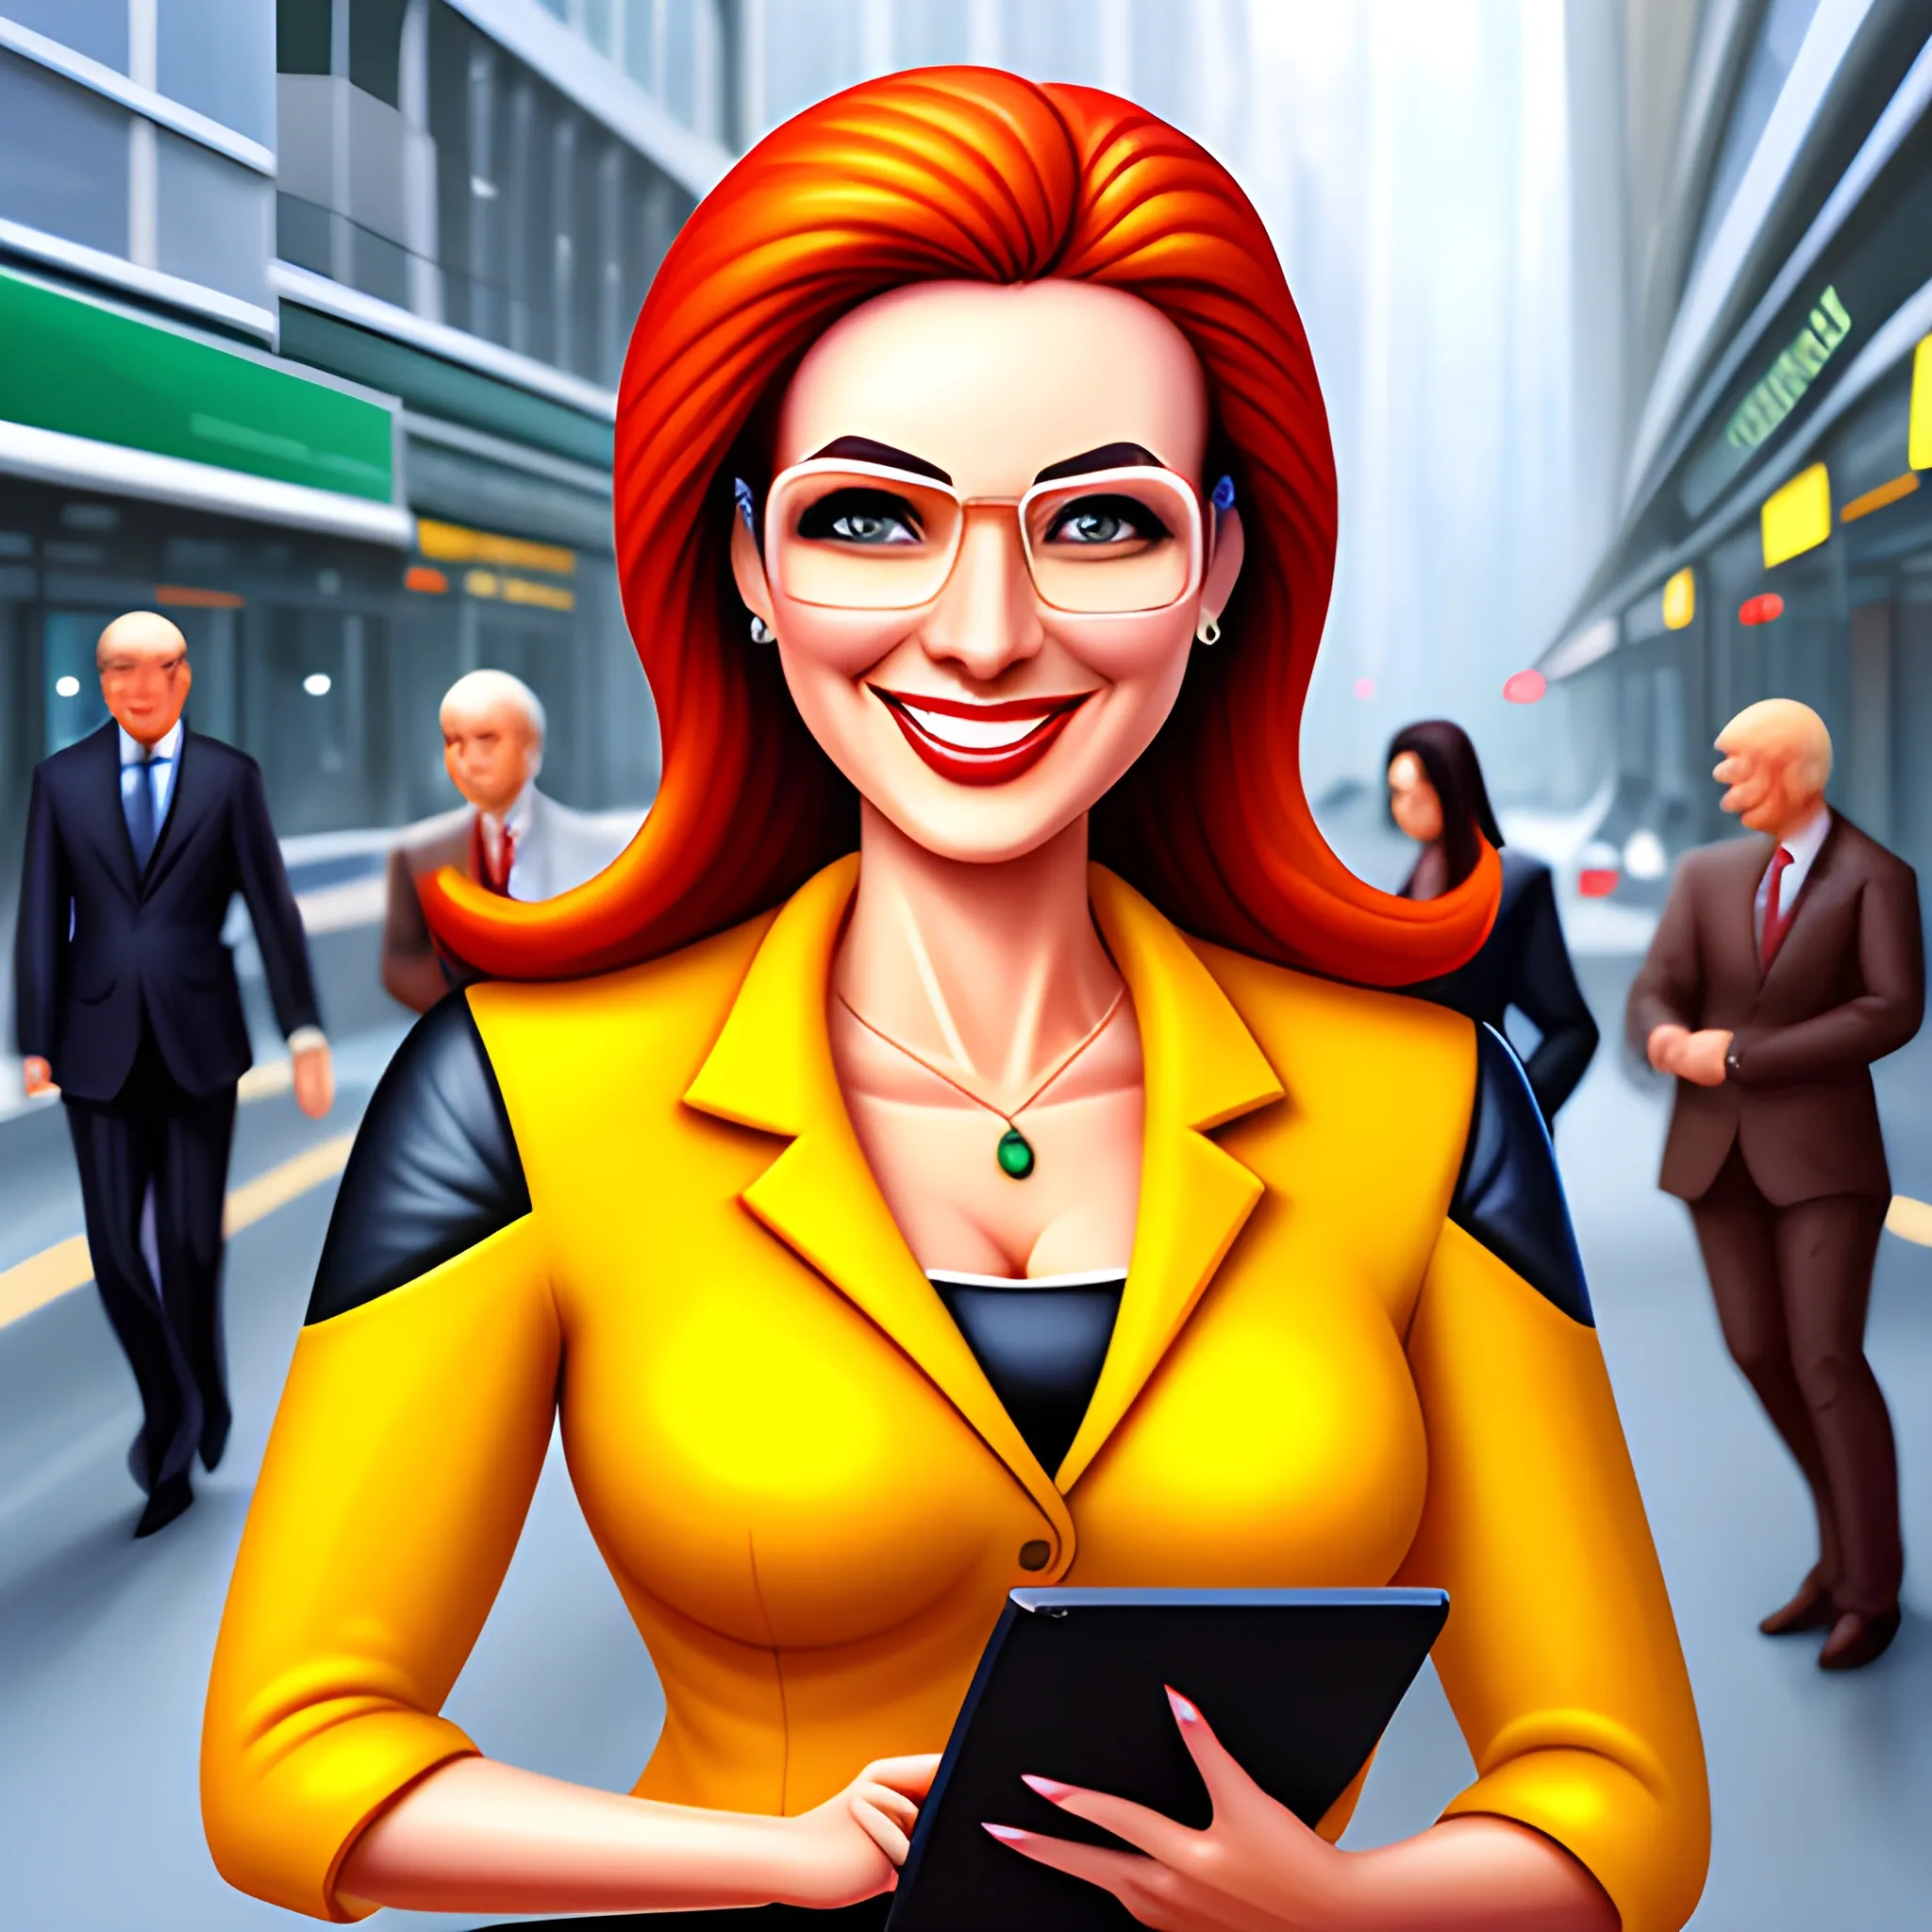 Friendly wise young high-tech female government worker. Should be warm, cheerful, knowledgeable, and smiling.  
, Cartoon, 3D, Oil Painting